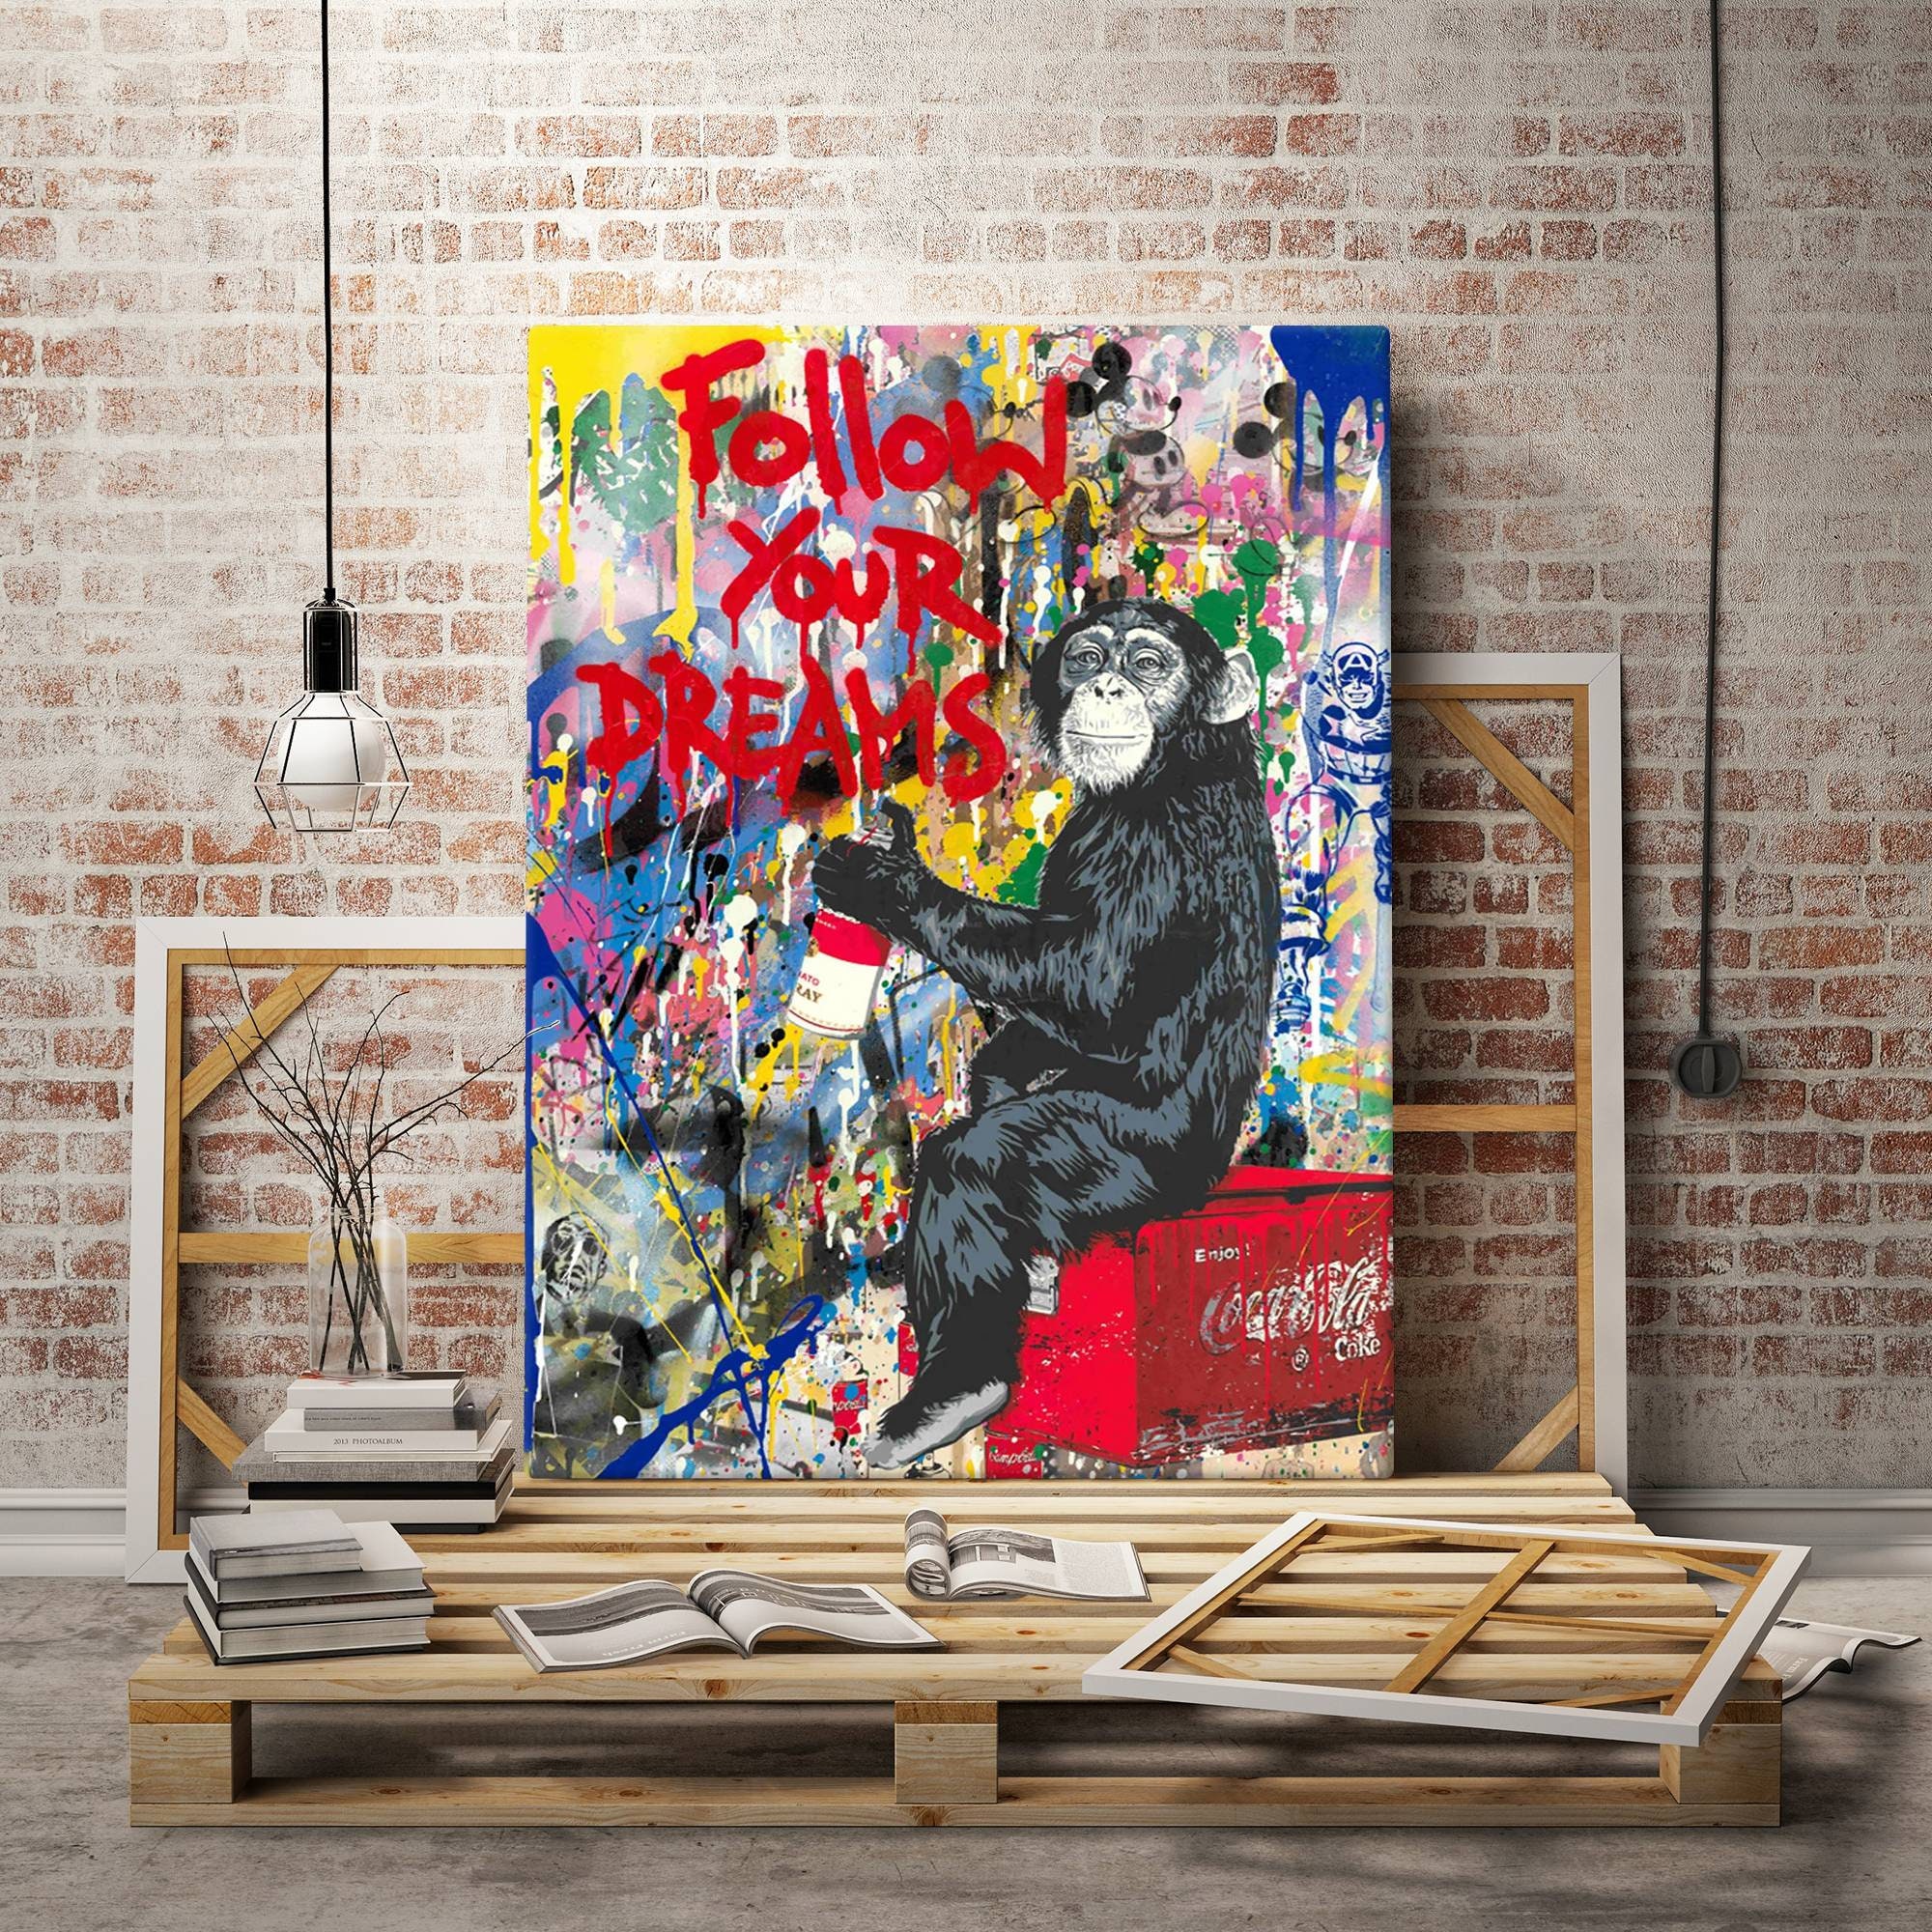 Banksy Animals Graffiti Stencil Art Collage Laugh Now Chimp Canvas Print  for Sale by WE-ARE-BANKSY